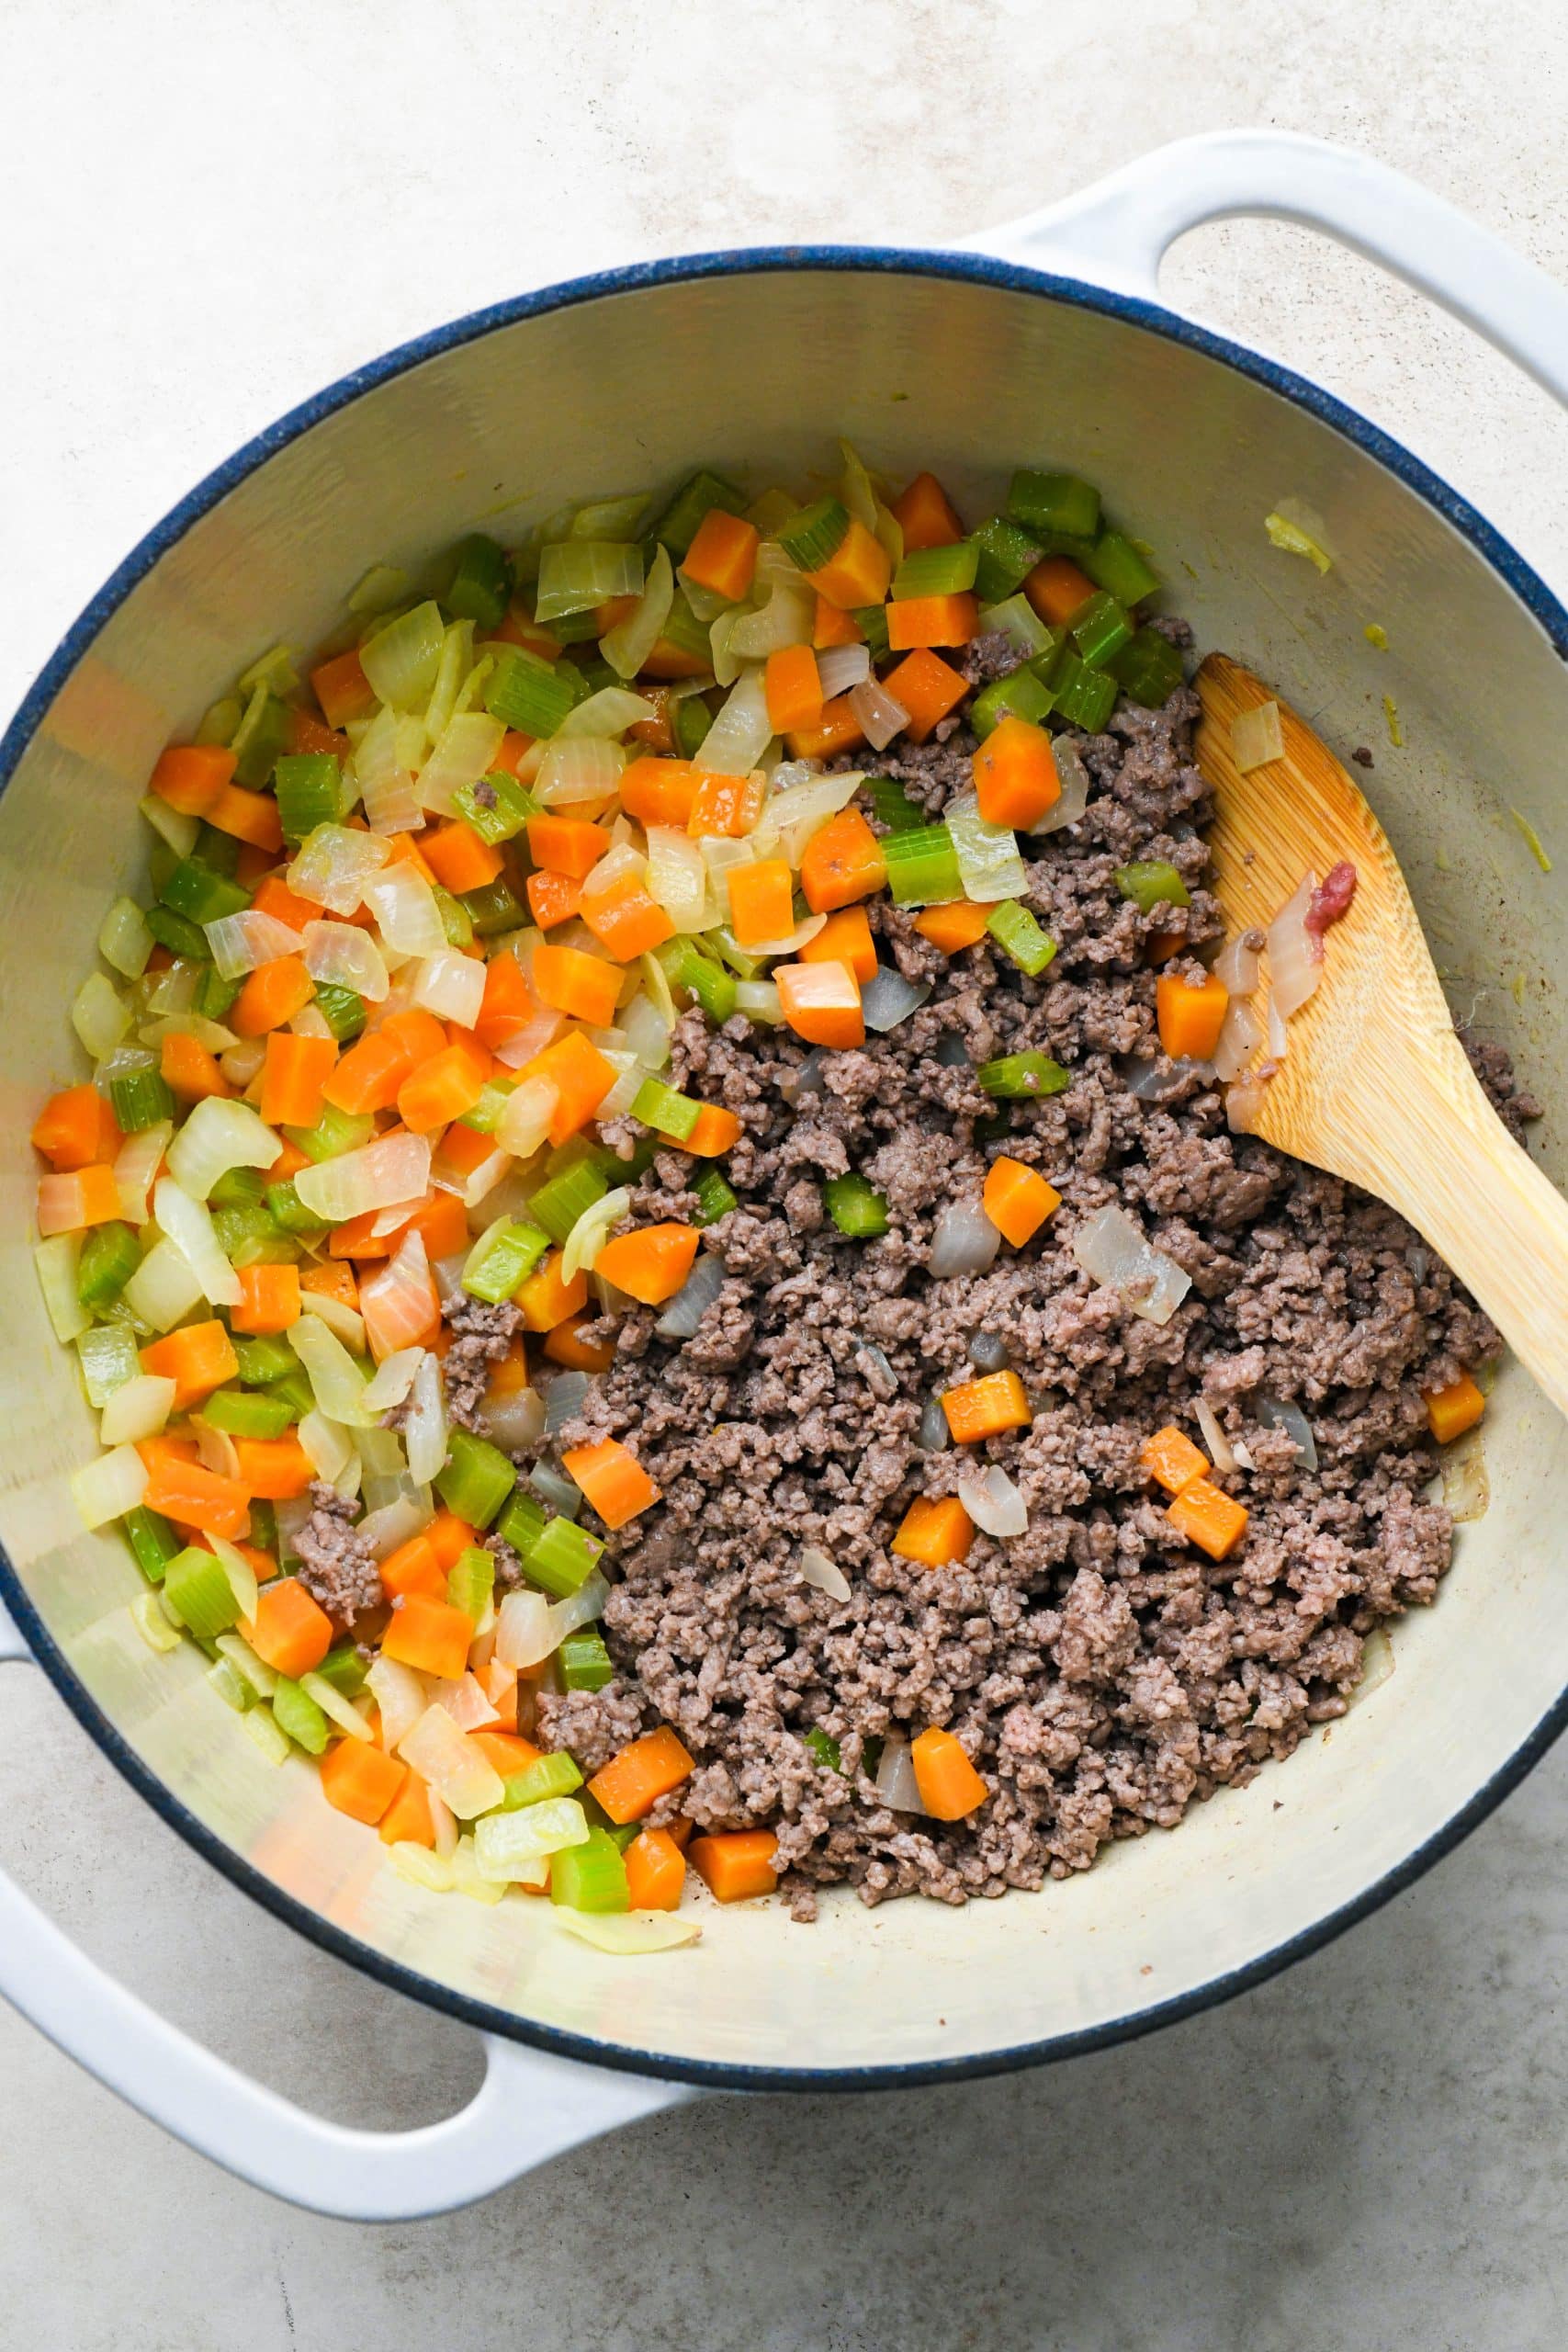 How to make shepherds pie soup: Ground beef cooked and crumbled in the soup pot with the sautéed veggies.